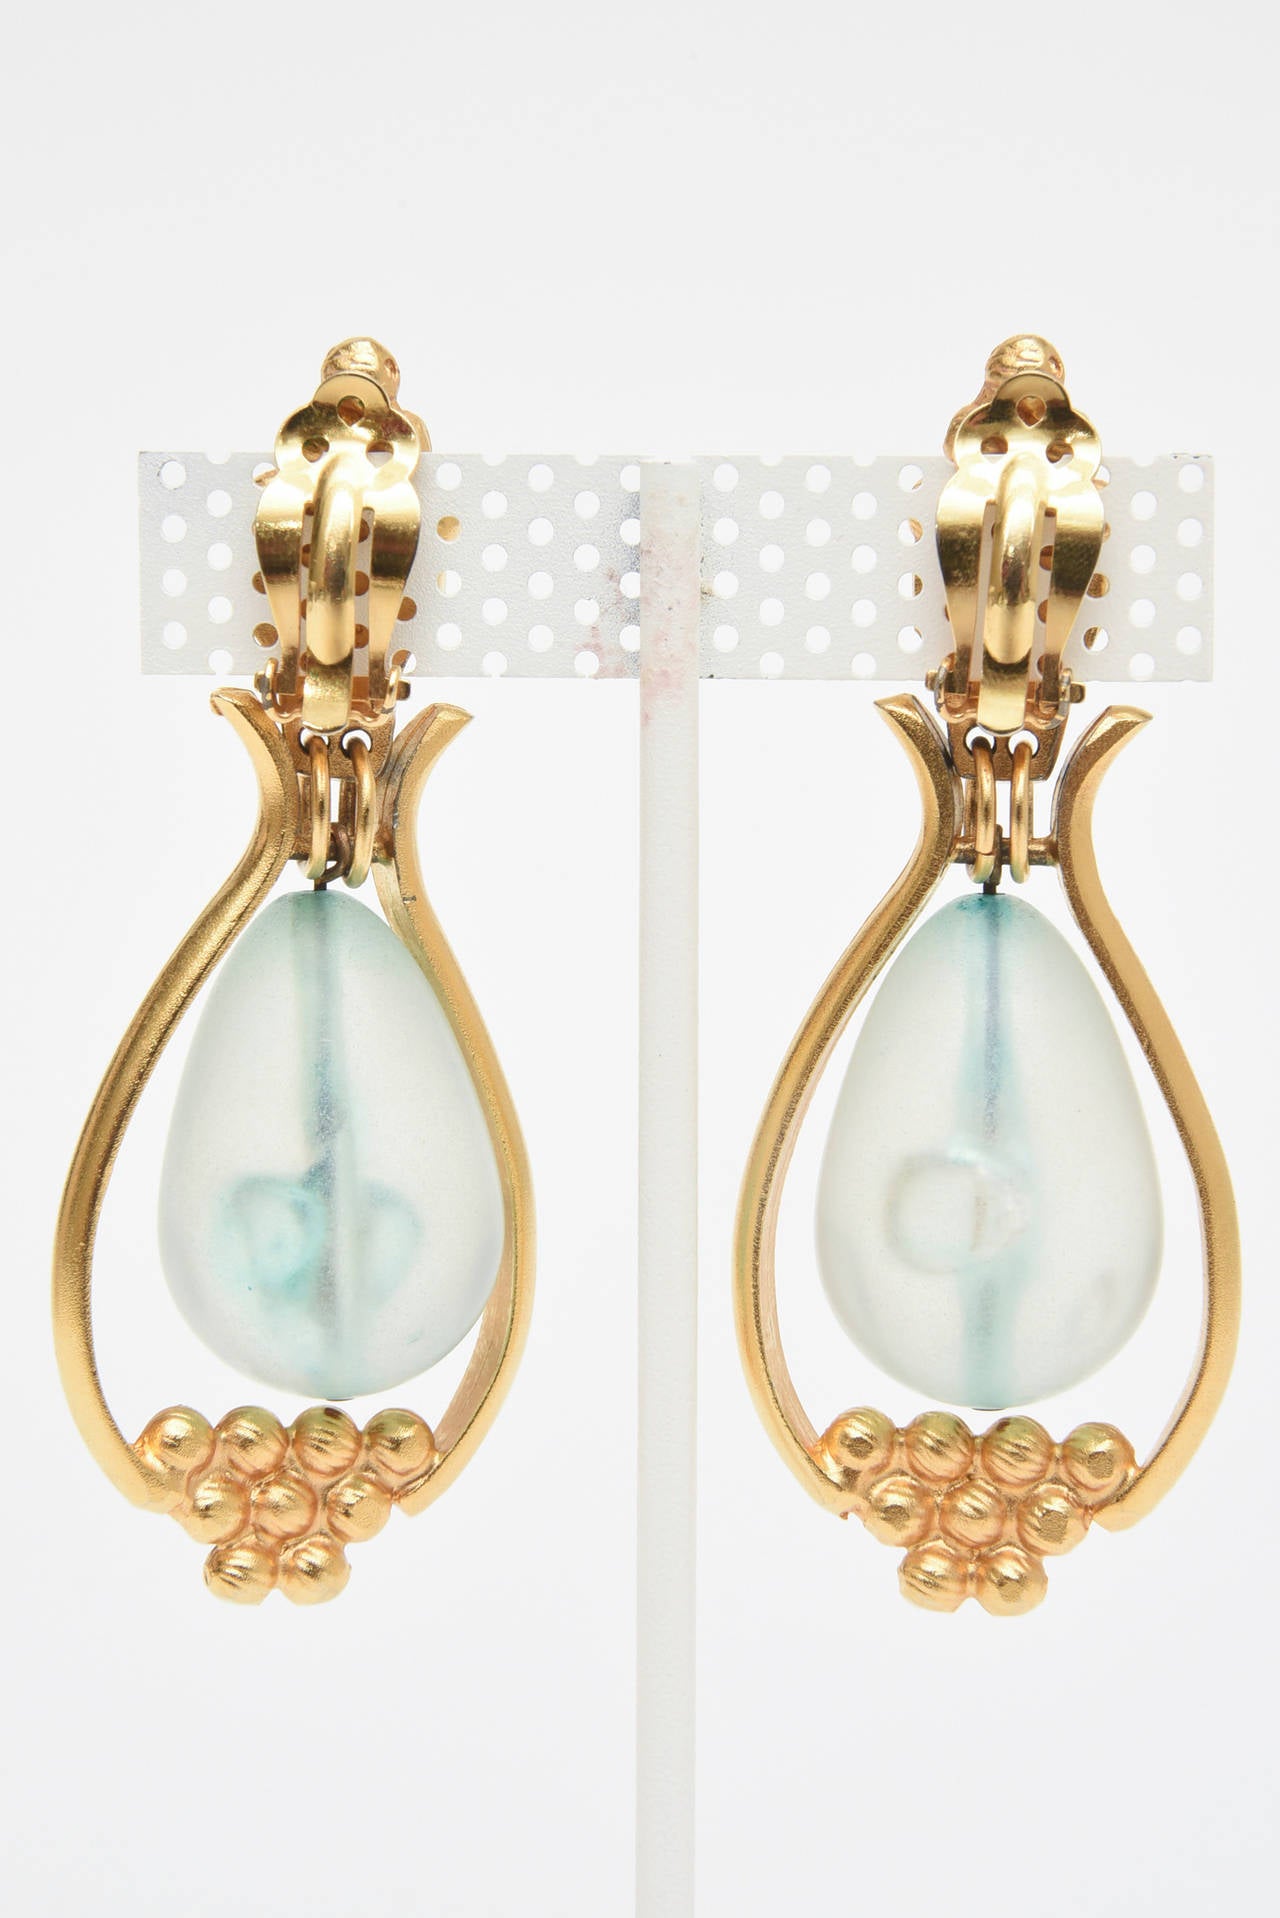 This pair of lovely 1980's clip on earrings are gold plated with a ethereal blue light turquoise resin drop in the center. They are modern, elegant and make a statement. Very beautiful on. These are perfect for any season but especially summer,